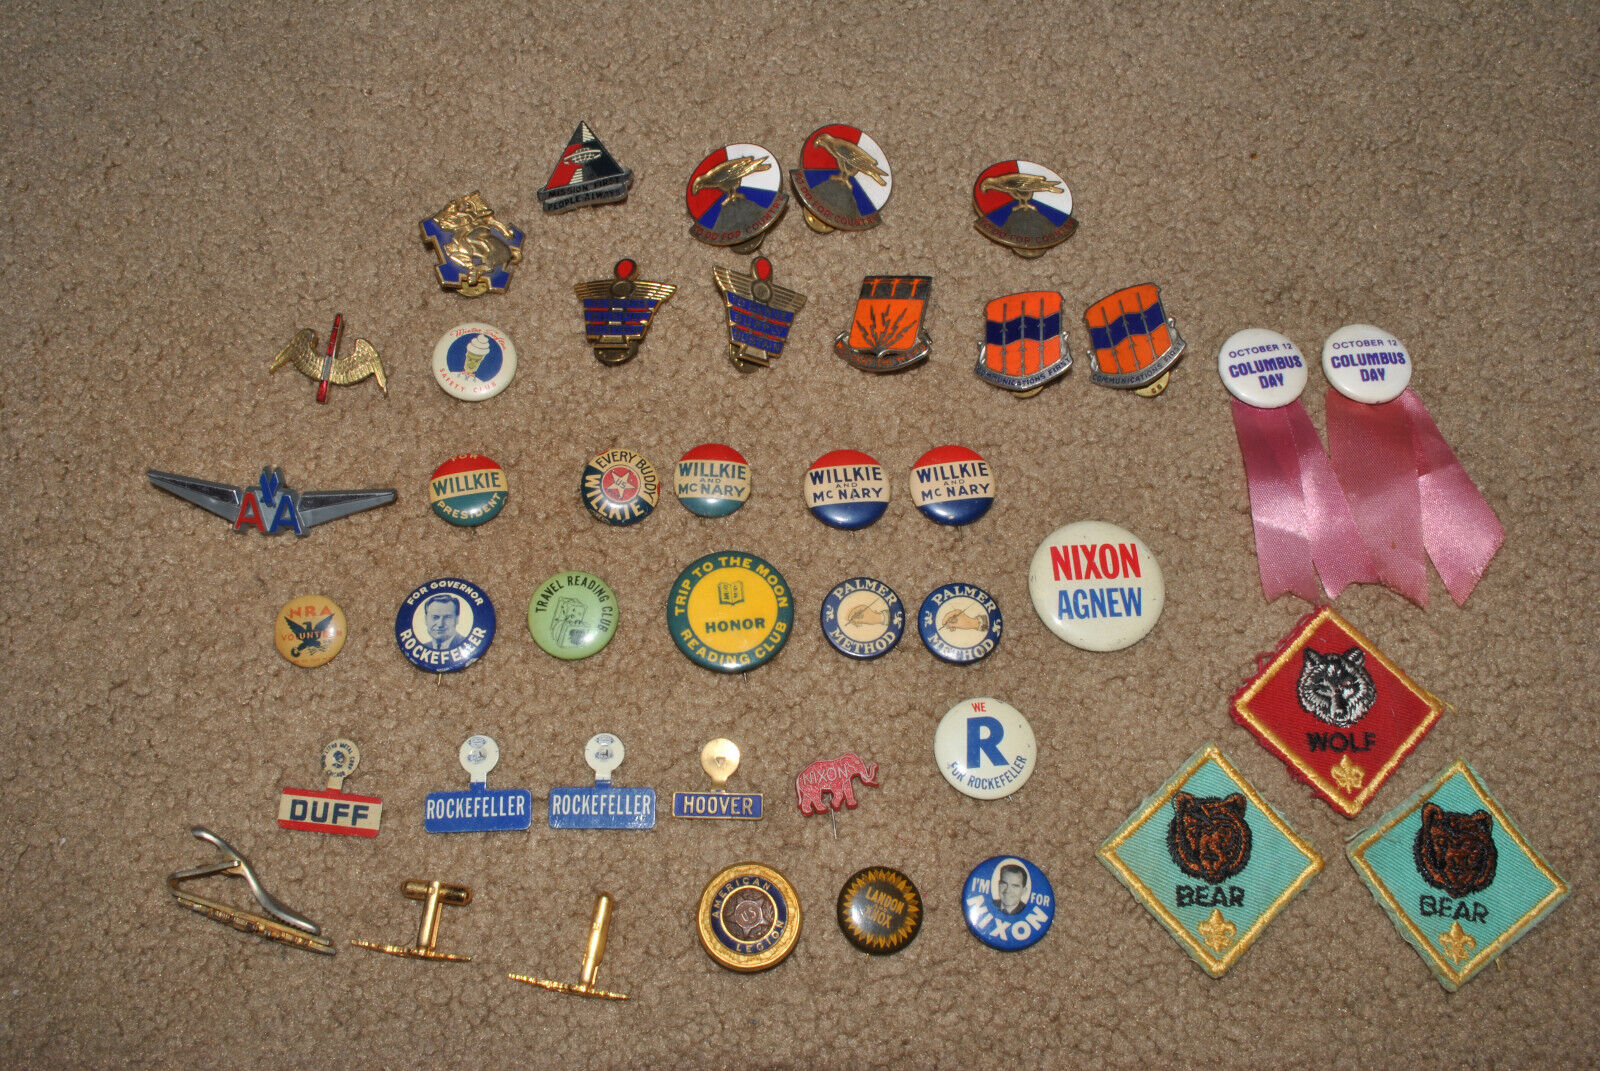 Lot of 43 Vintage Boy Scouts Patches, Politcal Campaign Pins, Ribbons, Cufflinks